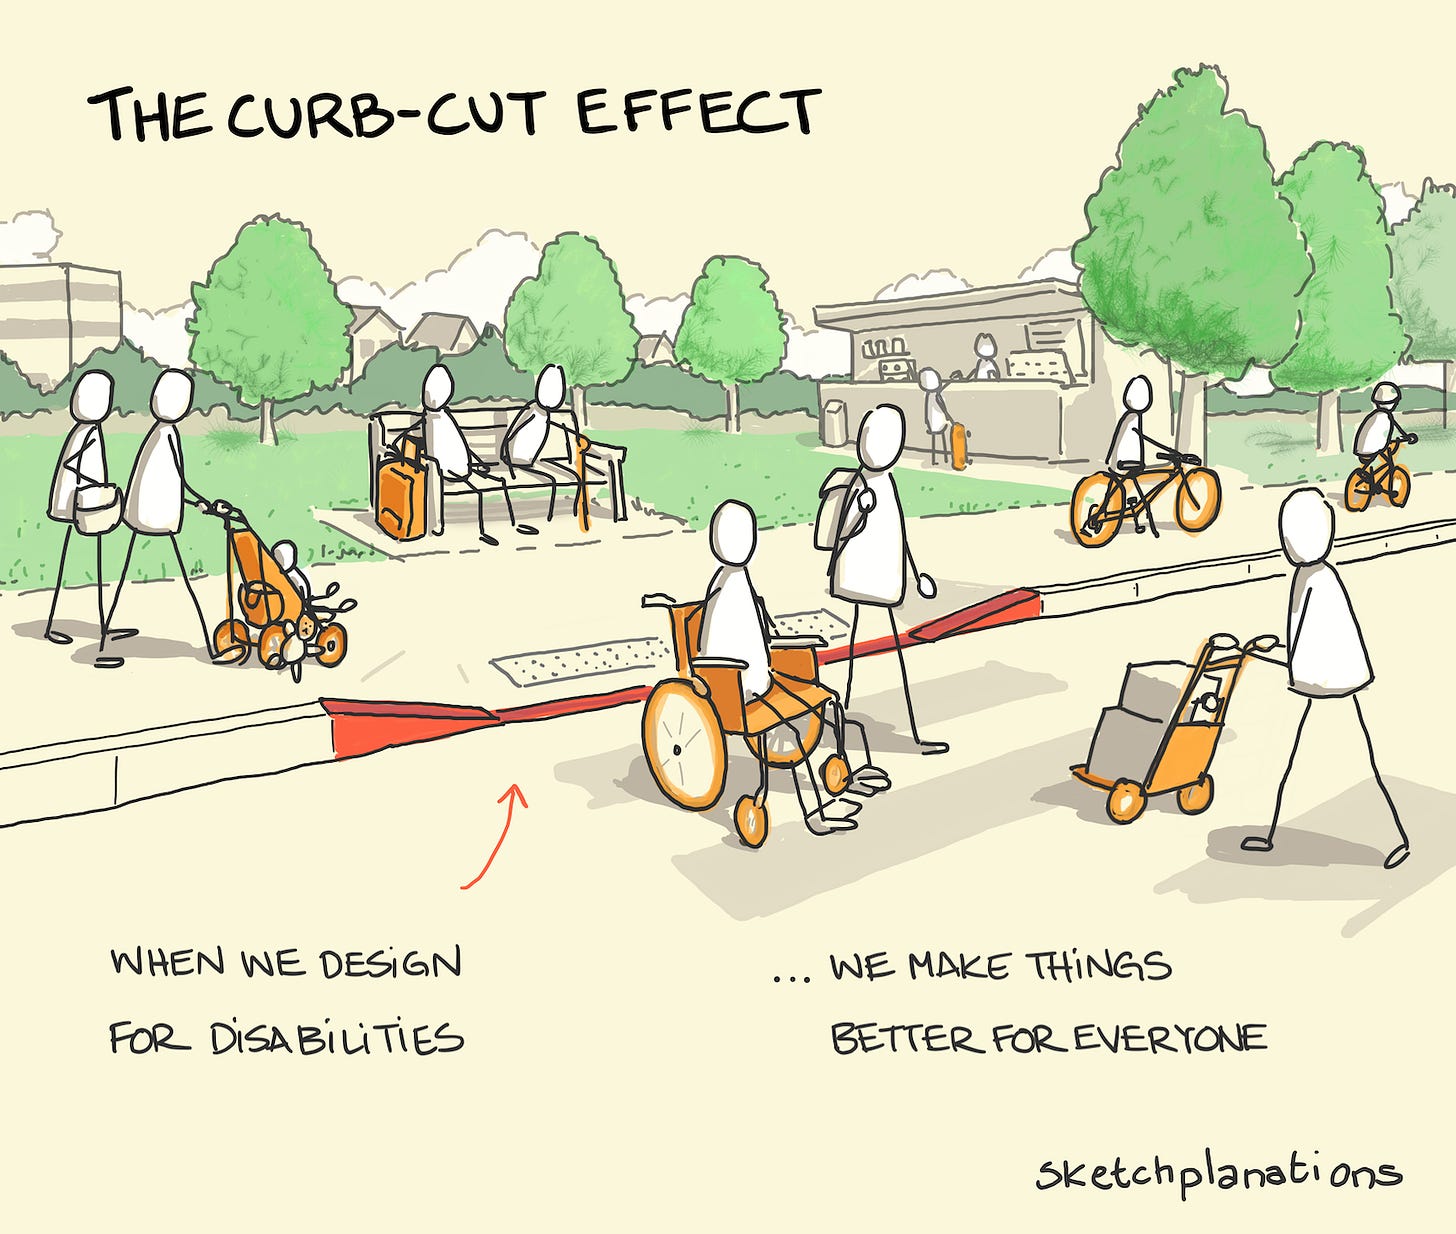 The curb-cut effect - Sketchplanations